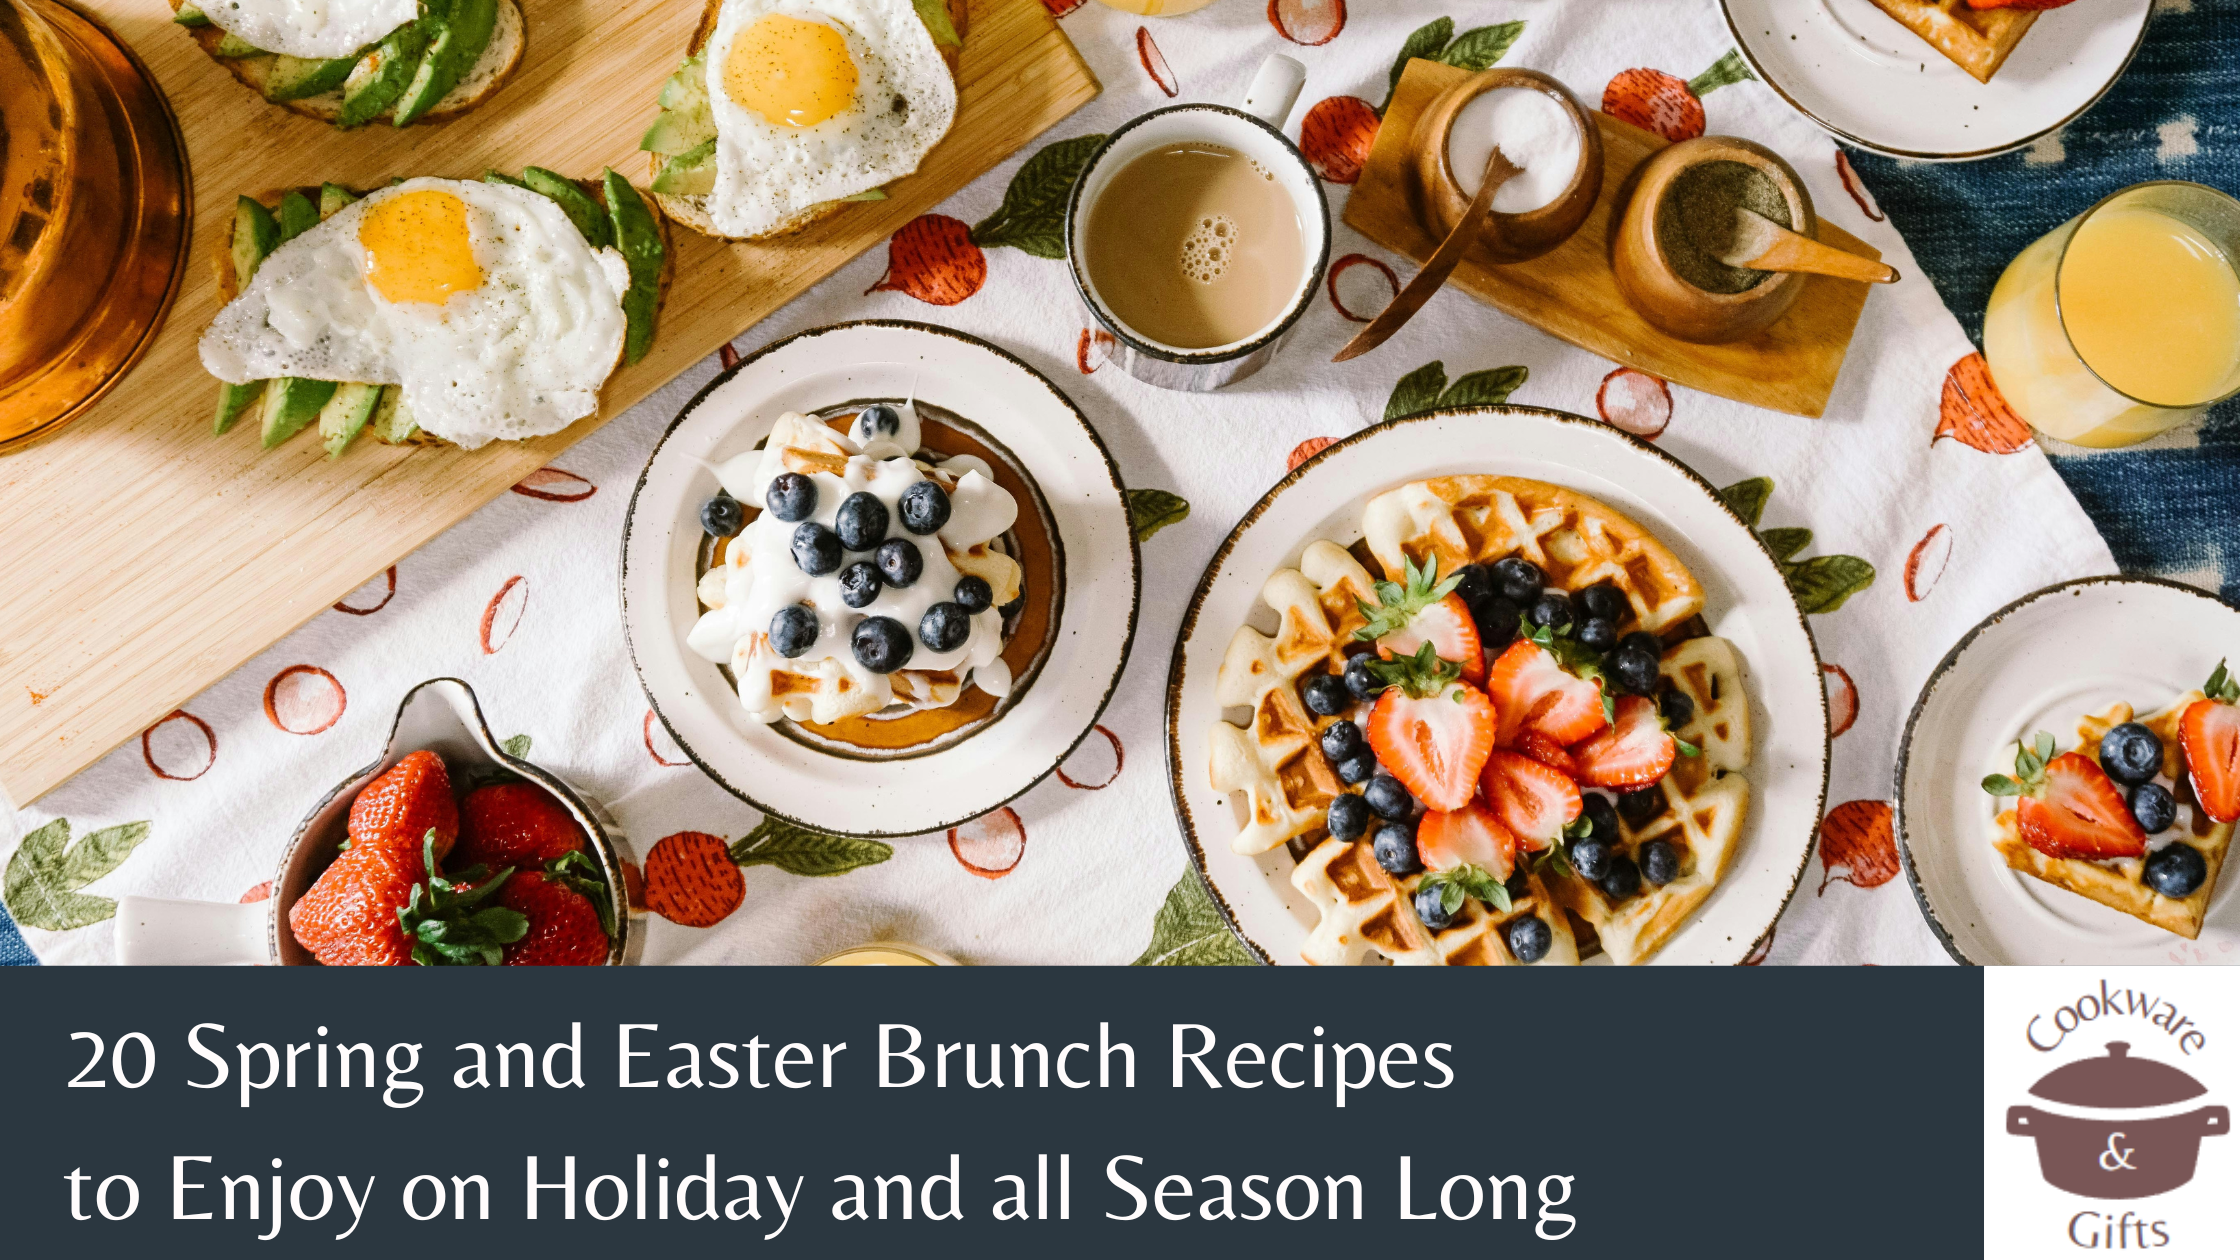 20 Spring and Easter Brunch Recipes to Enjoy On Holiday and All Season Long